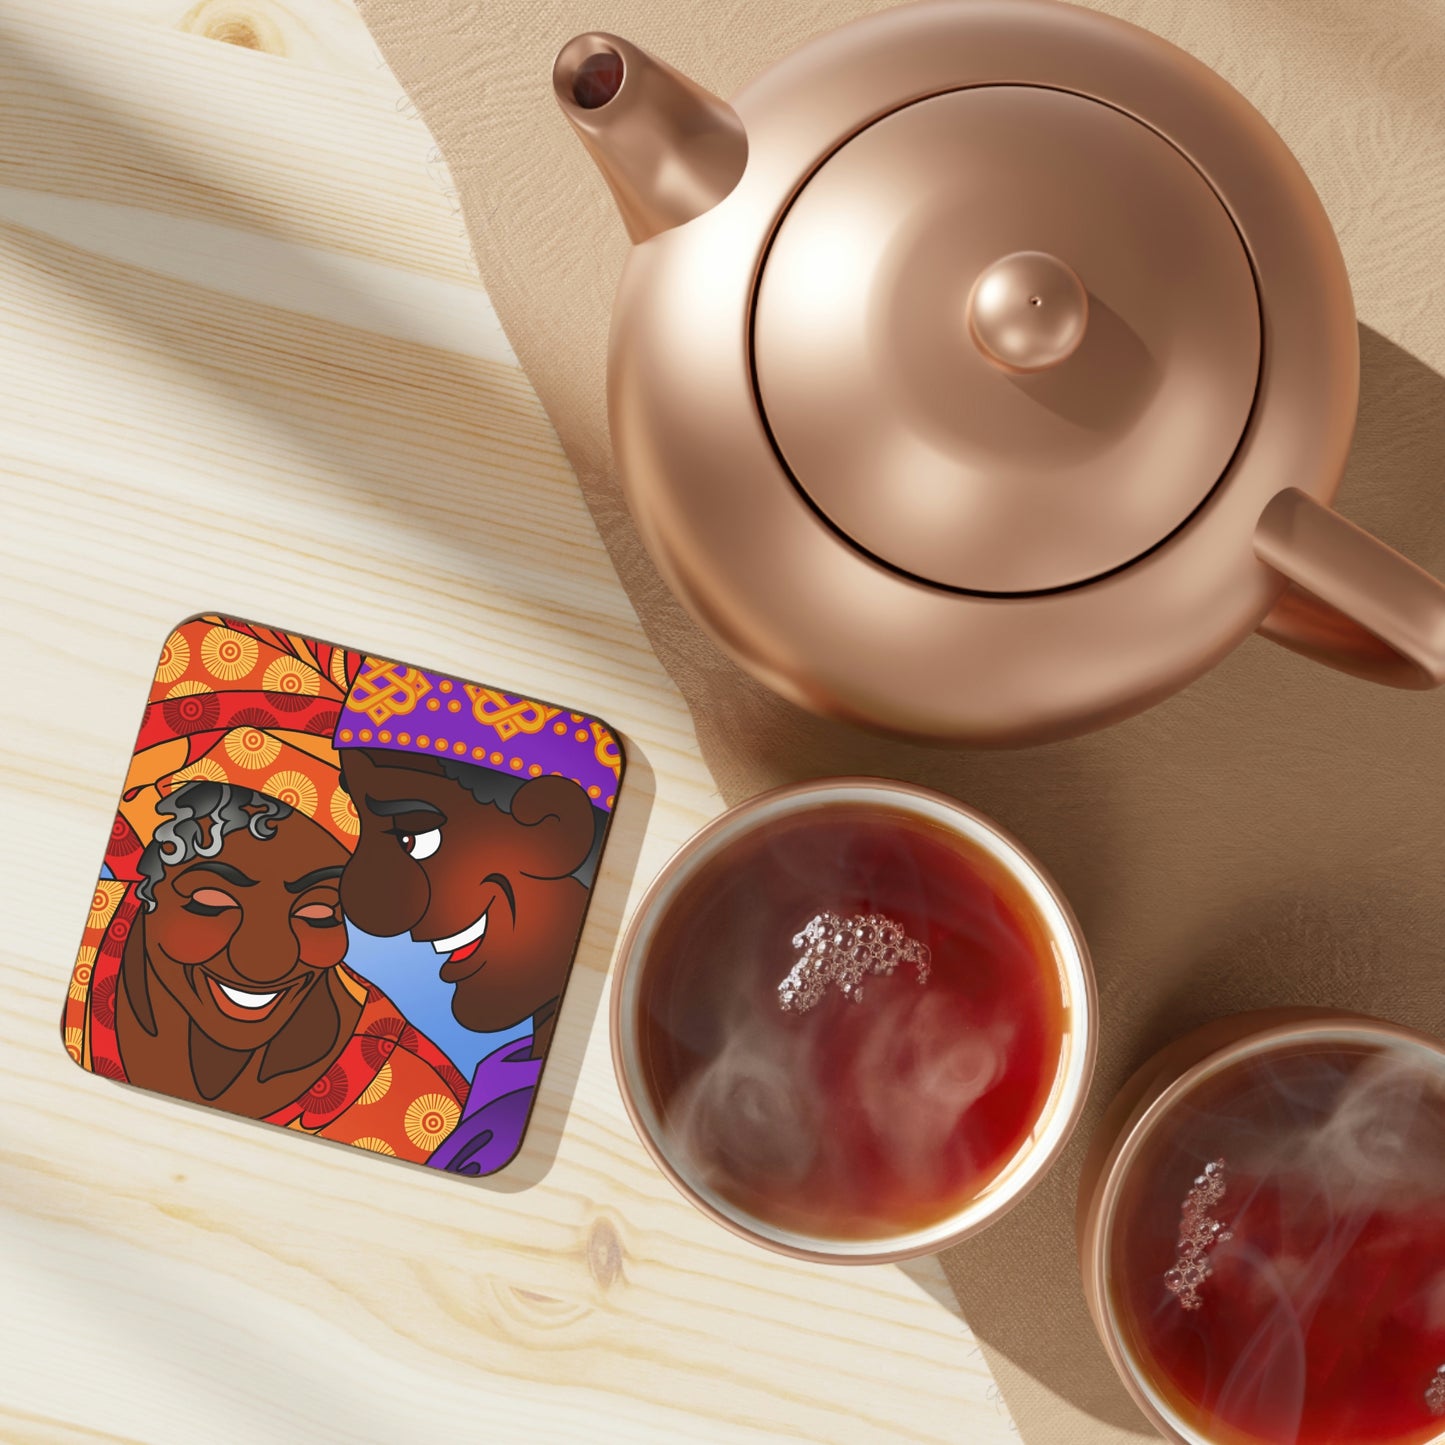 The Paramount Chief and One Wise Woman Hardboard Back Coaster